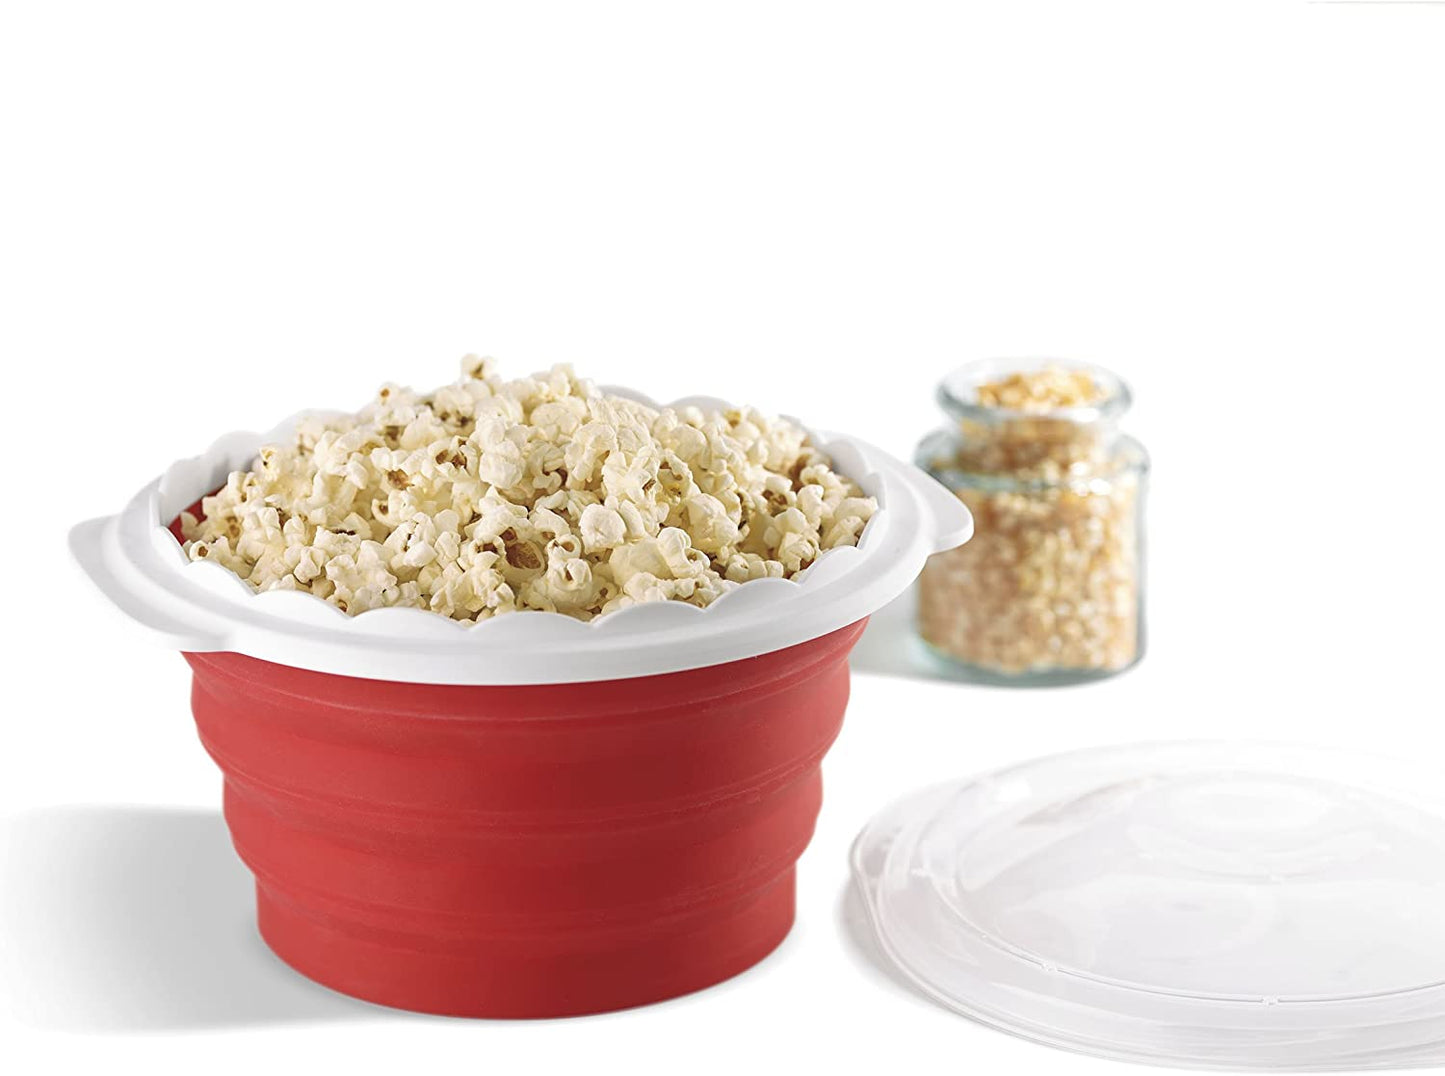 Cuisinart CTG-00-MPM, Microwave Popcorn Maker, One Size, Red